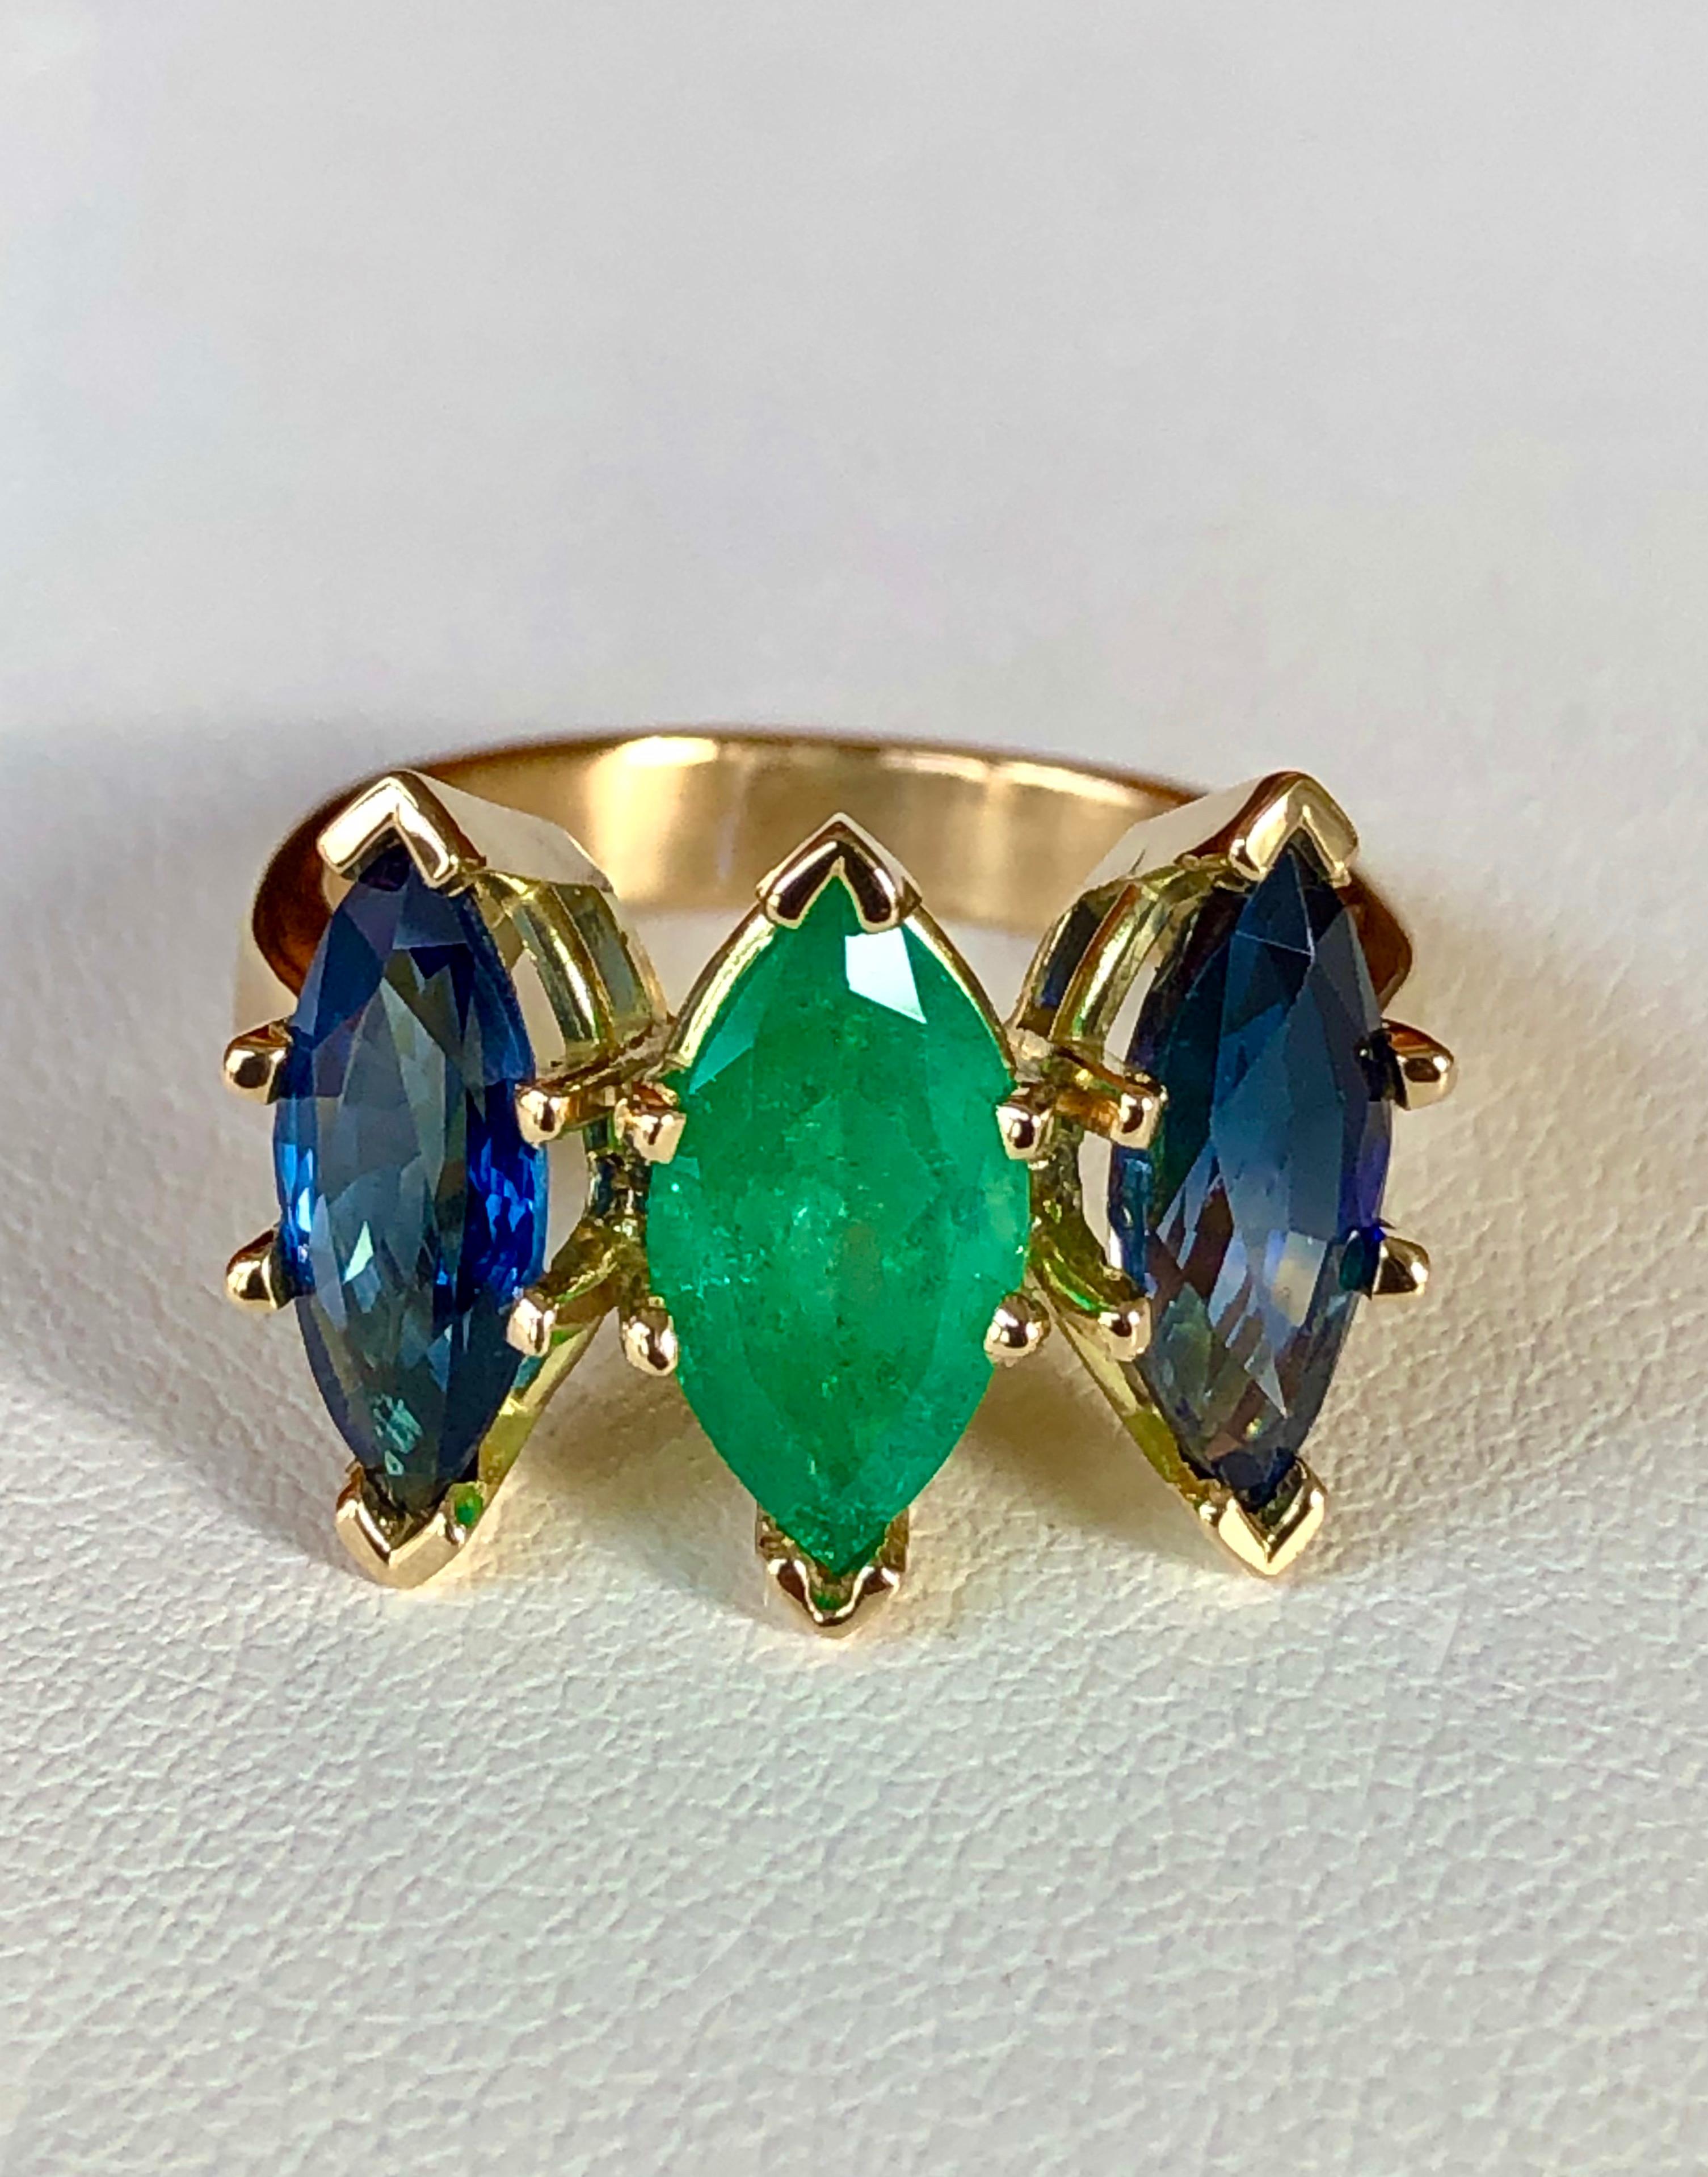 A SUPER RARE Find for this unique three stone ring features a center one marquise cut bright green natural Colombian emerald 1.38 carat , surrounded by two natural Ceylon sapphires marquise cut totaling 3.06 carat. The stones are carefully matched